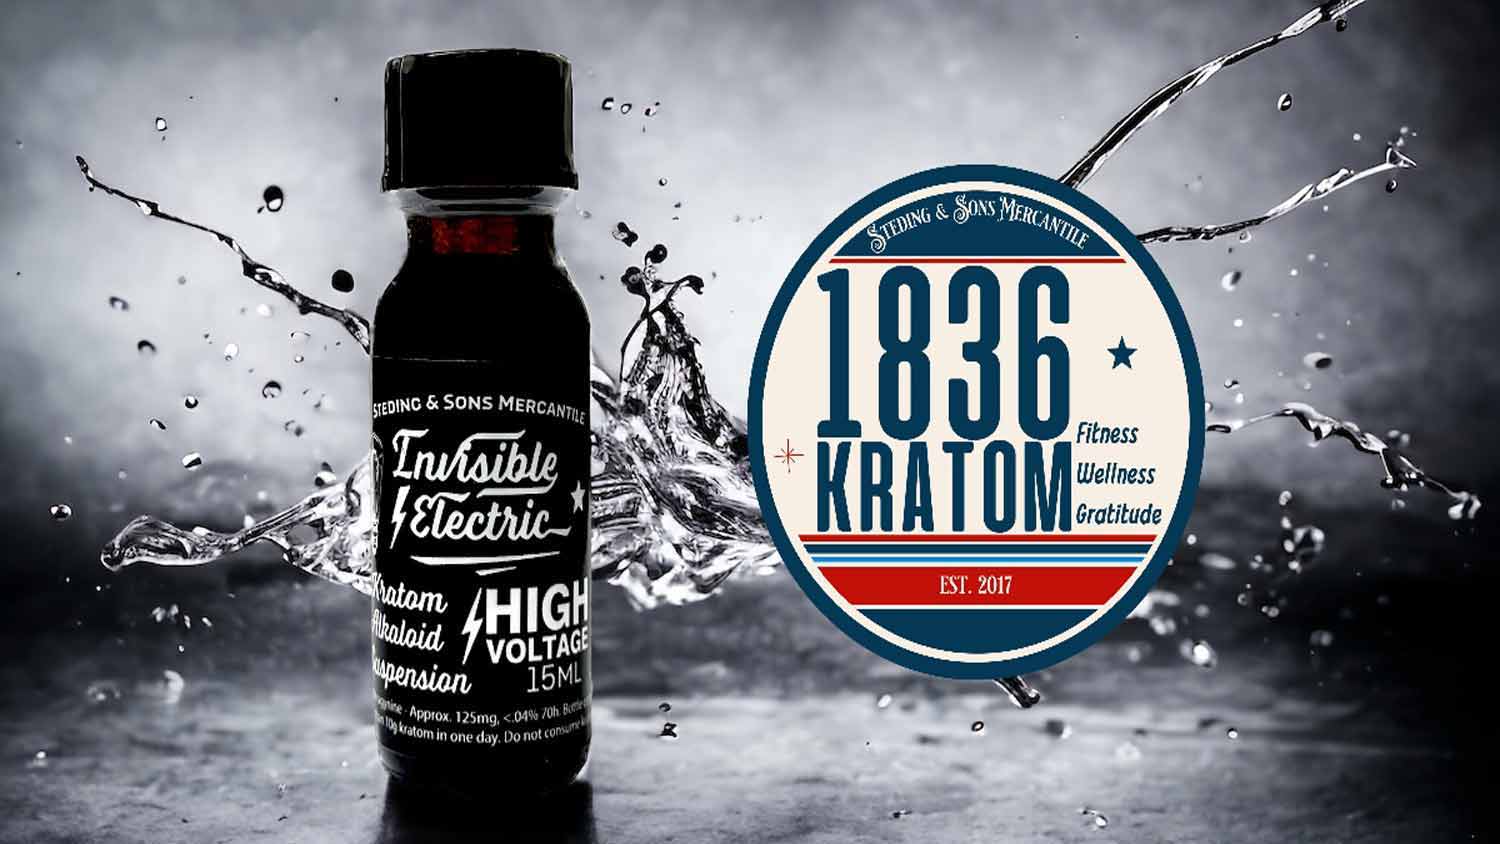 1836 Kratom Invisible Electric High Voltage Kratom Extract Shot 15ml